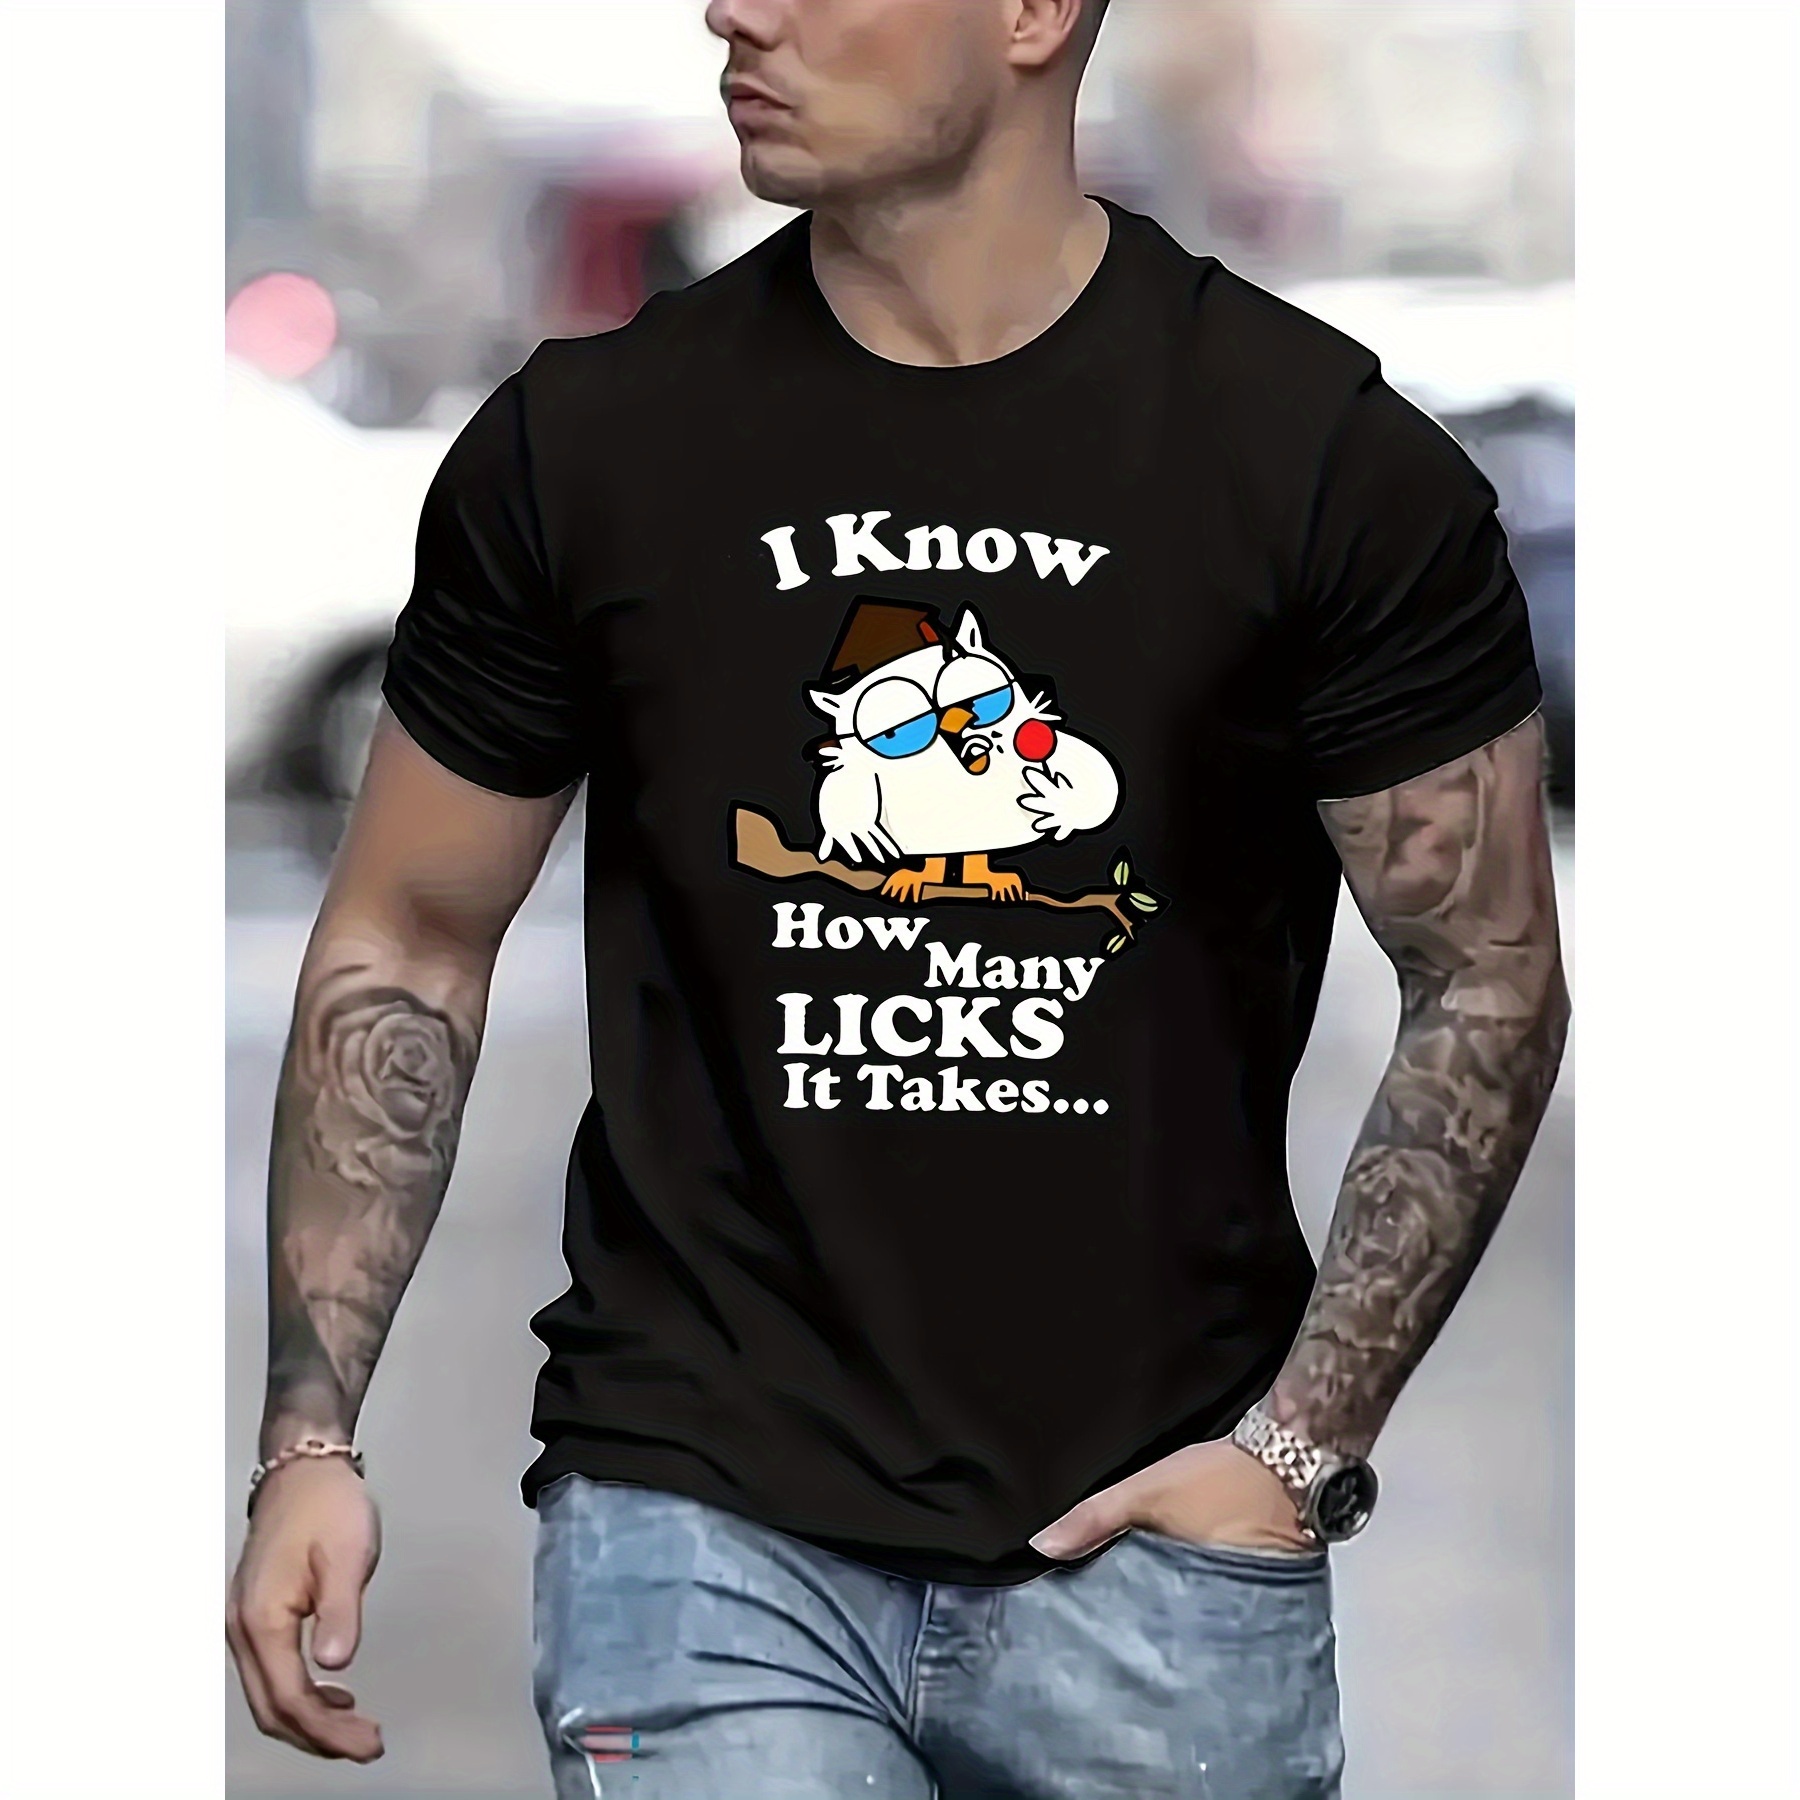 

Cartoon Owl Print Men's Round Neck Fashion Short-sleeved Sports T-shirt, Comfortable And Versatile, Suitable For Summer And Spring, Sports Style, Comfortable Edition T-shirt, As A Gift